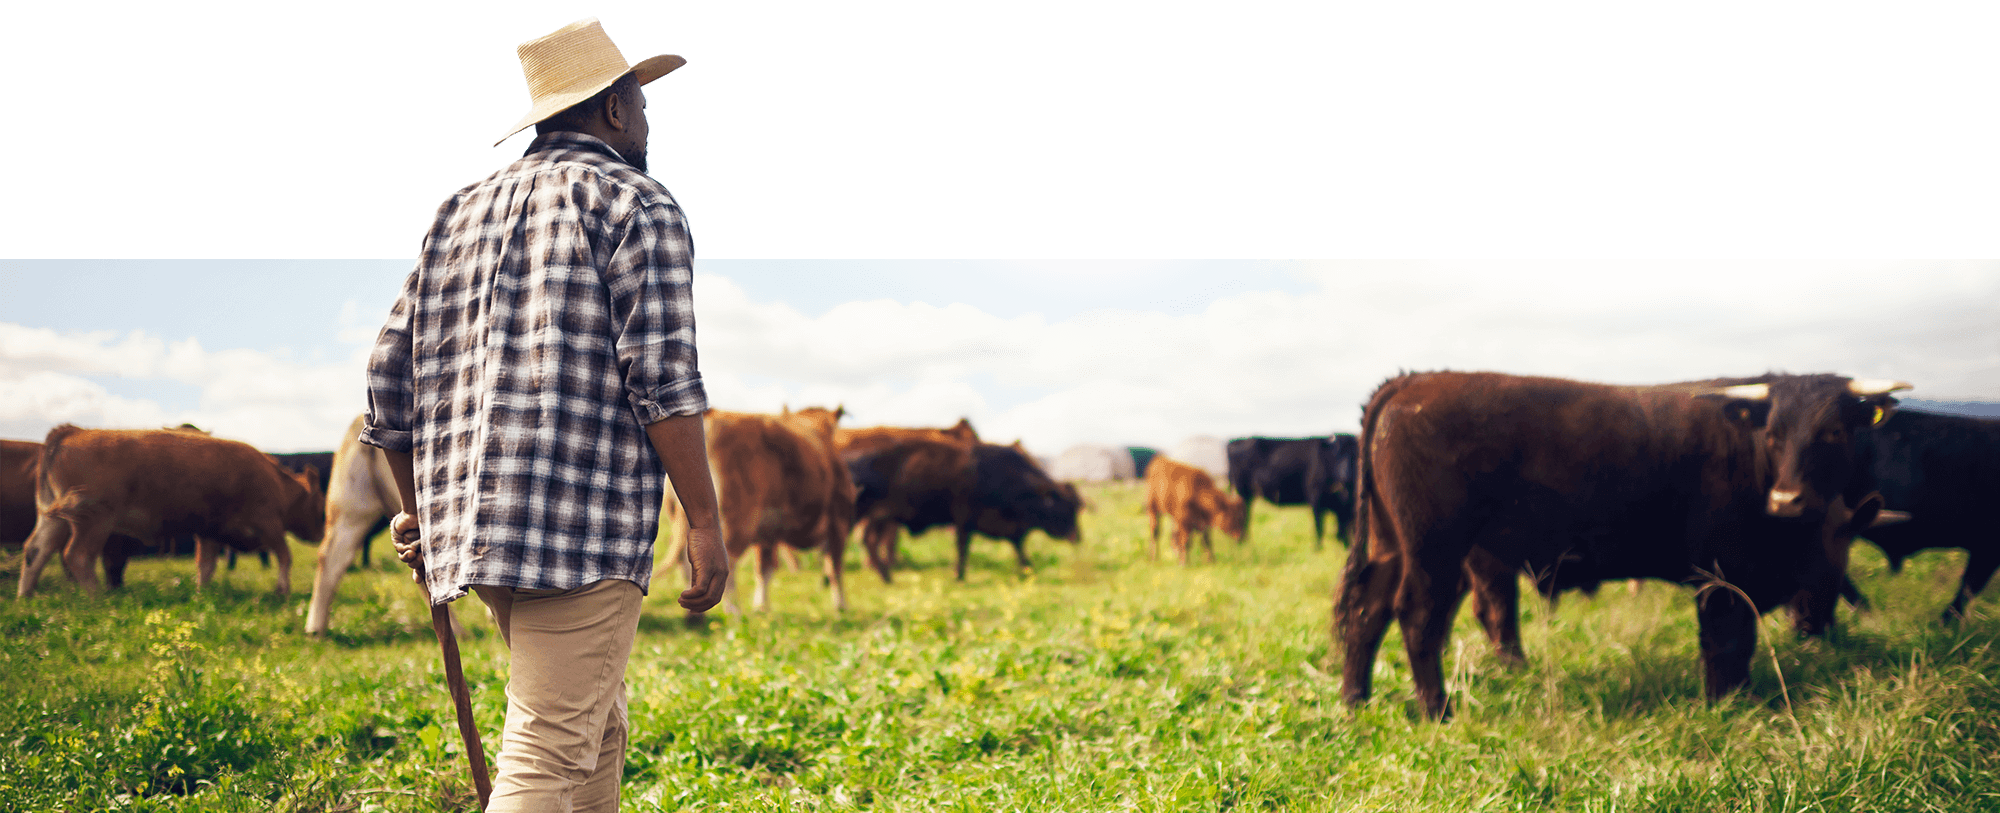 Farmer and his cattle